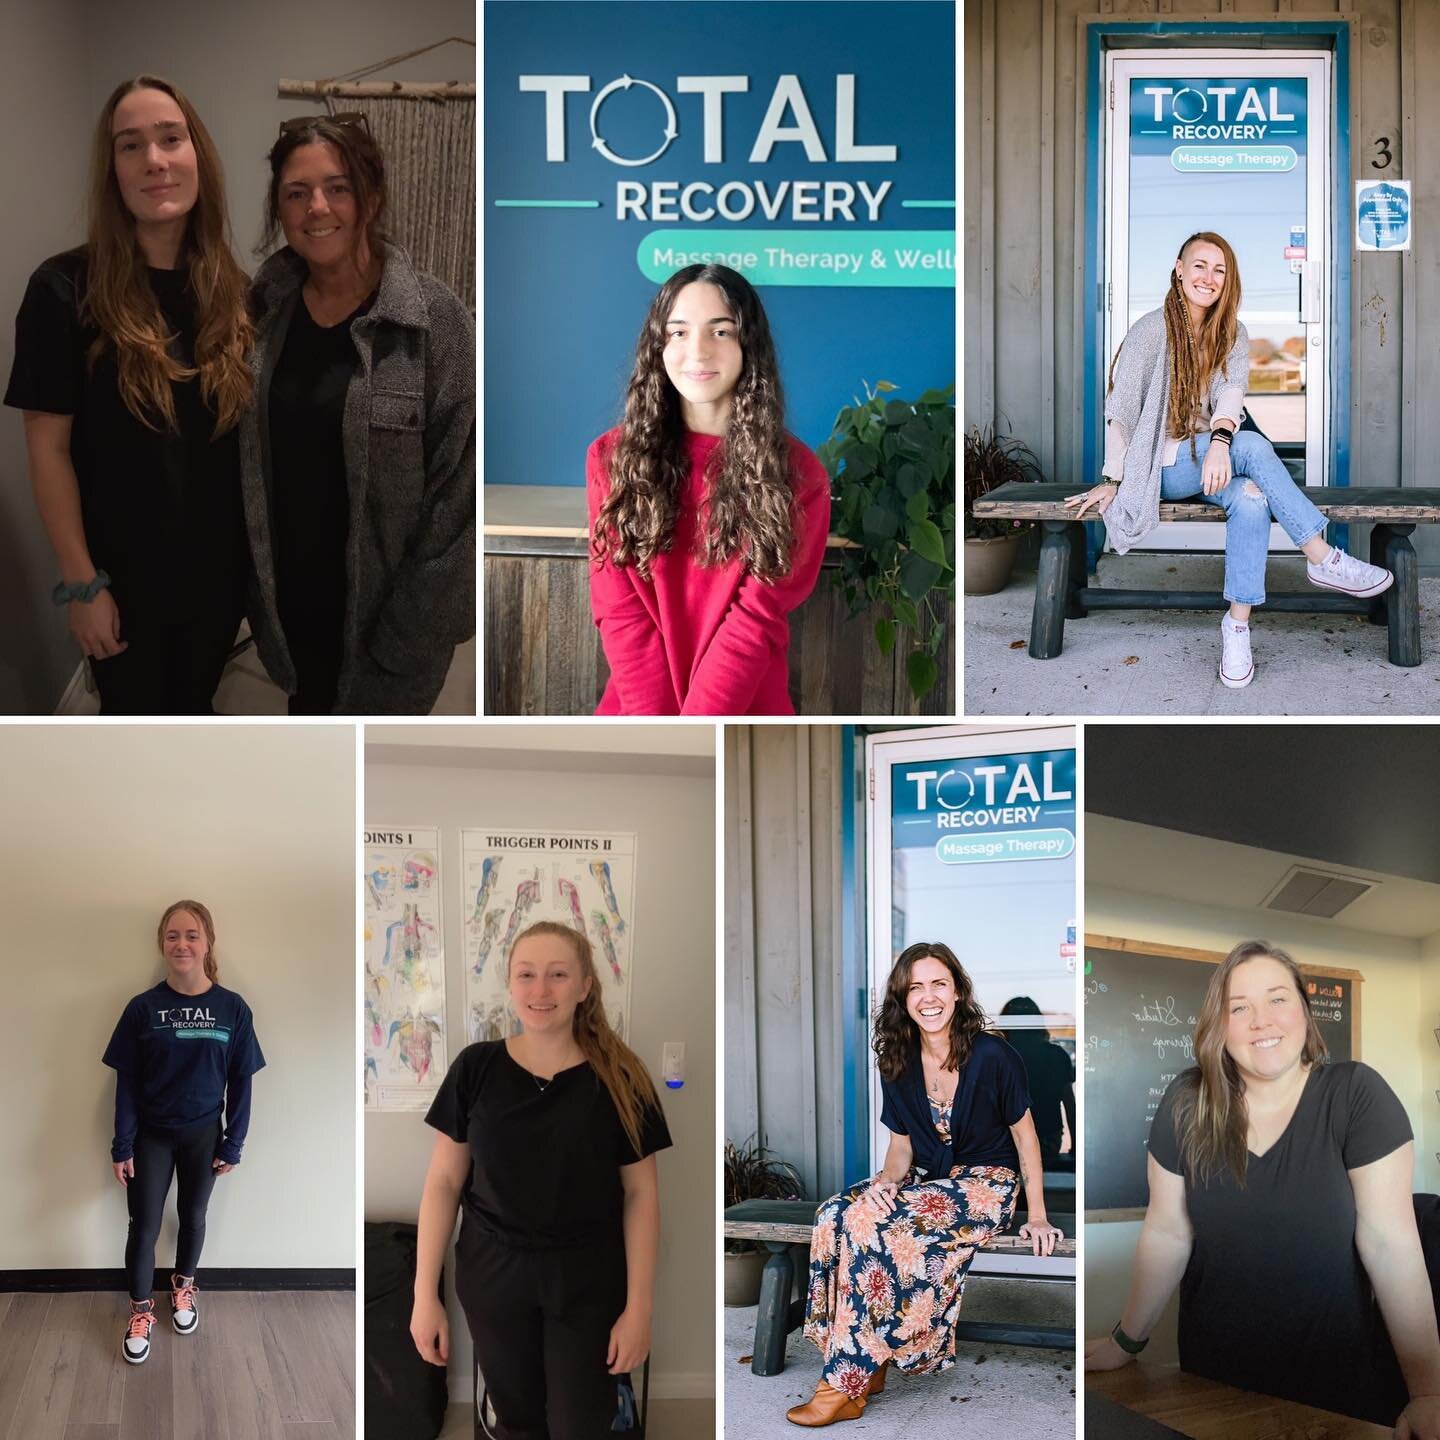 We celebrate these incredible women every day, but we wanted to remind everyone just how awesome they are!
.
The encouragement, support and authenticity they bring every day is a beautiful example of women empowering women and we love showing up for 